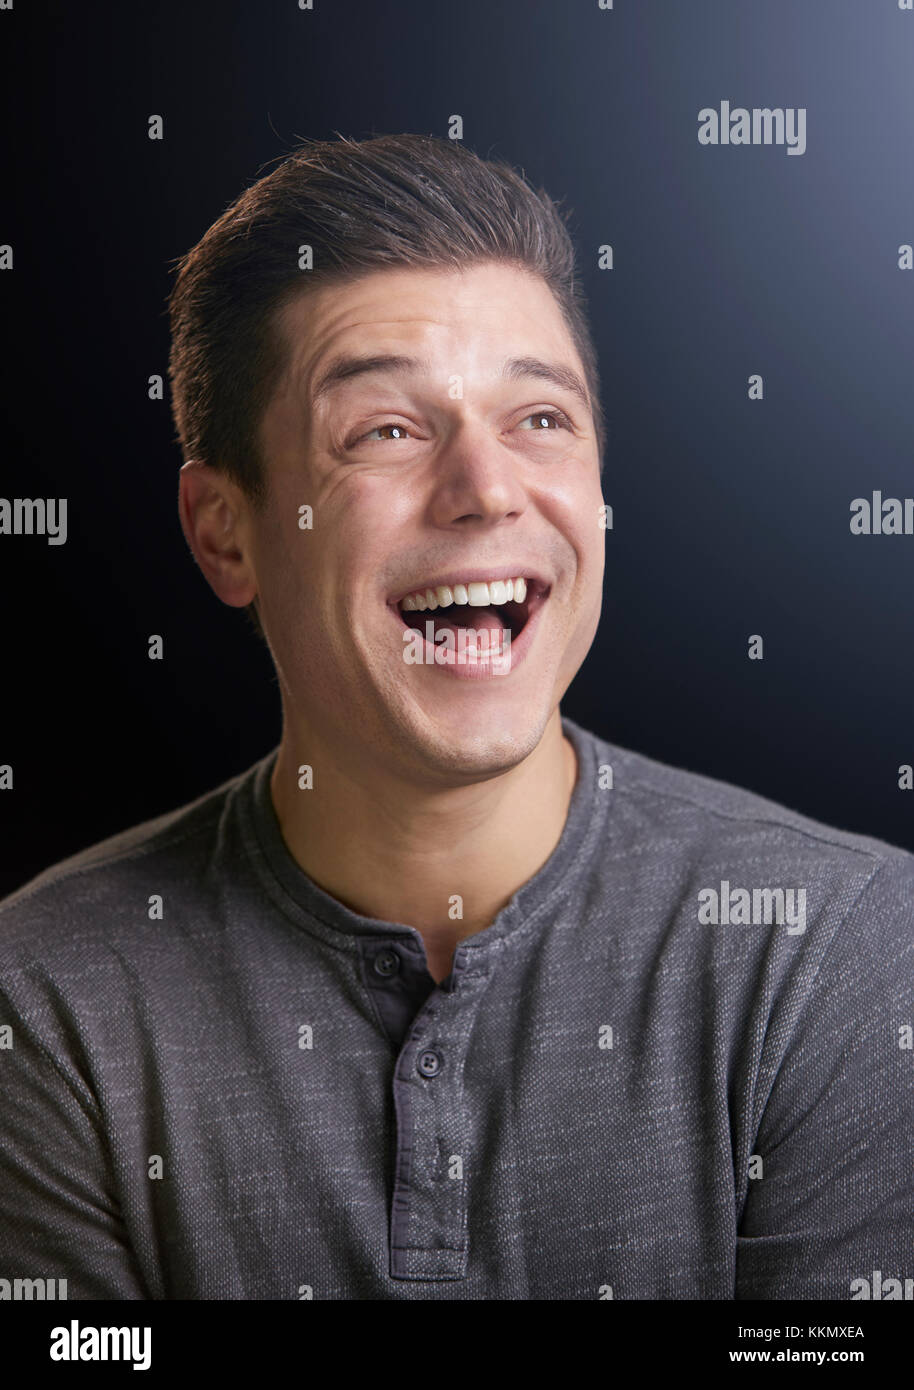 Laughing young man looking up, portrait vertical Banque D'Images